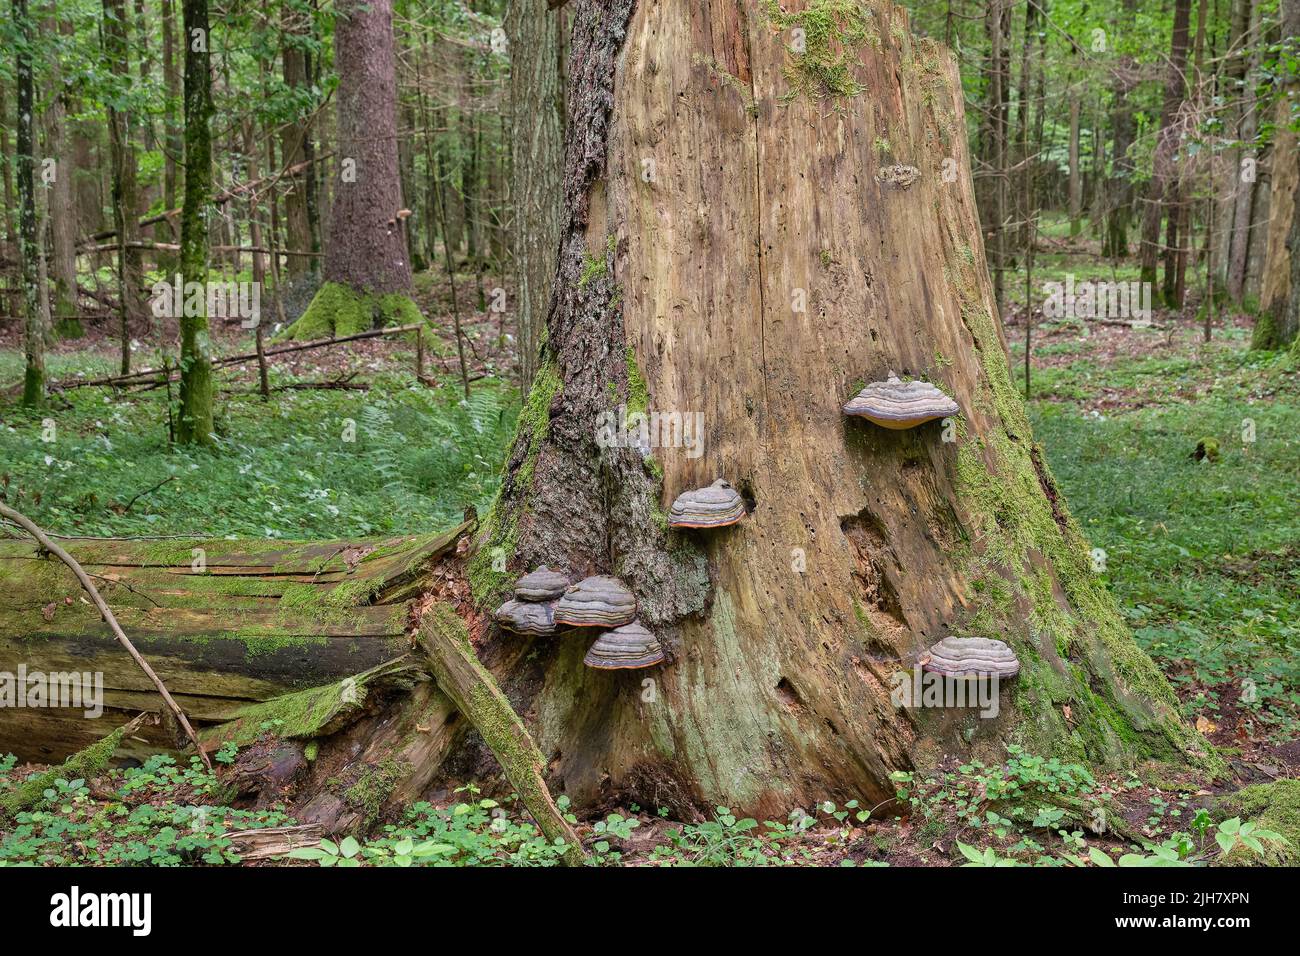 Group of Polypore fungi in fall grows over spruce tree stumps, Bialowieza Forest, Poland, Europe Stock Photo